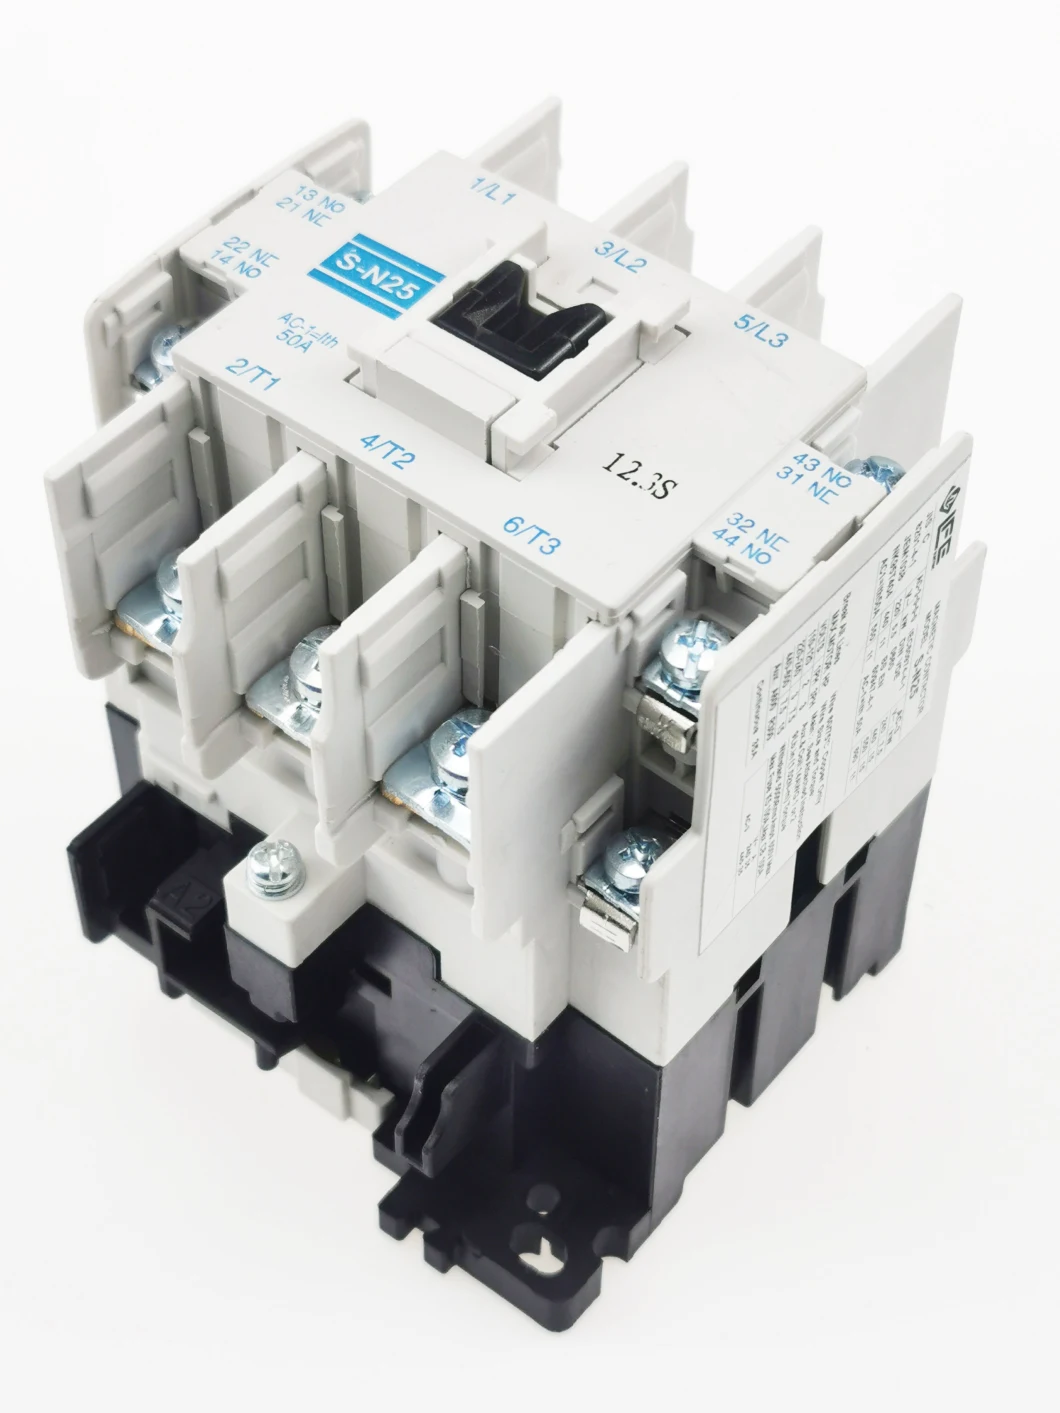 S-N12 AC Contactor, ISO9001 Passed High Quality AC Contactor, CE Proved AC Contactor